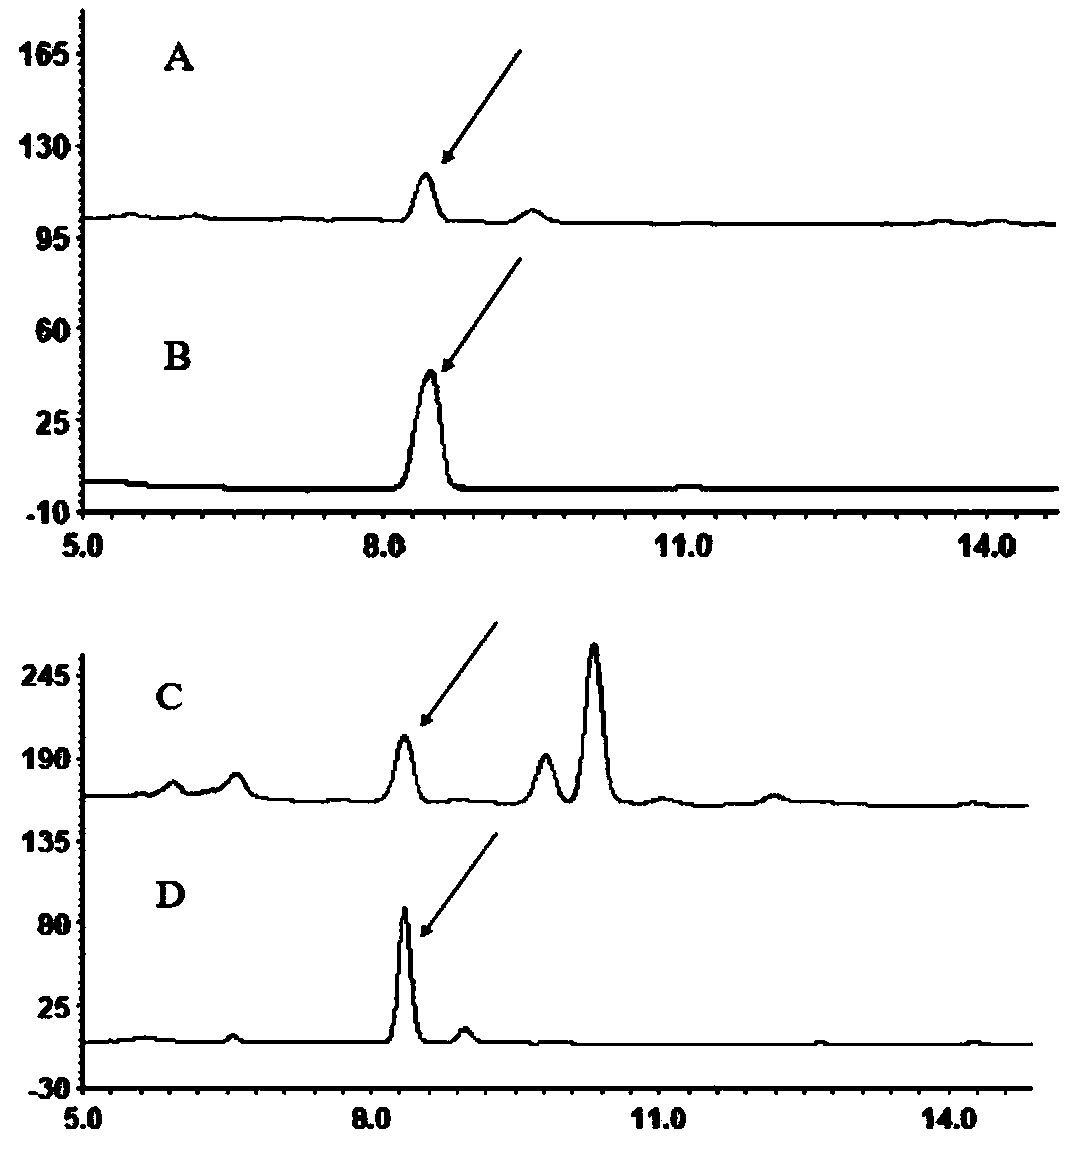 Recombinant saccharomyces cerevisiae for producing dammarenediol and protopanoxadiol using xylose and construction method